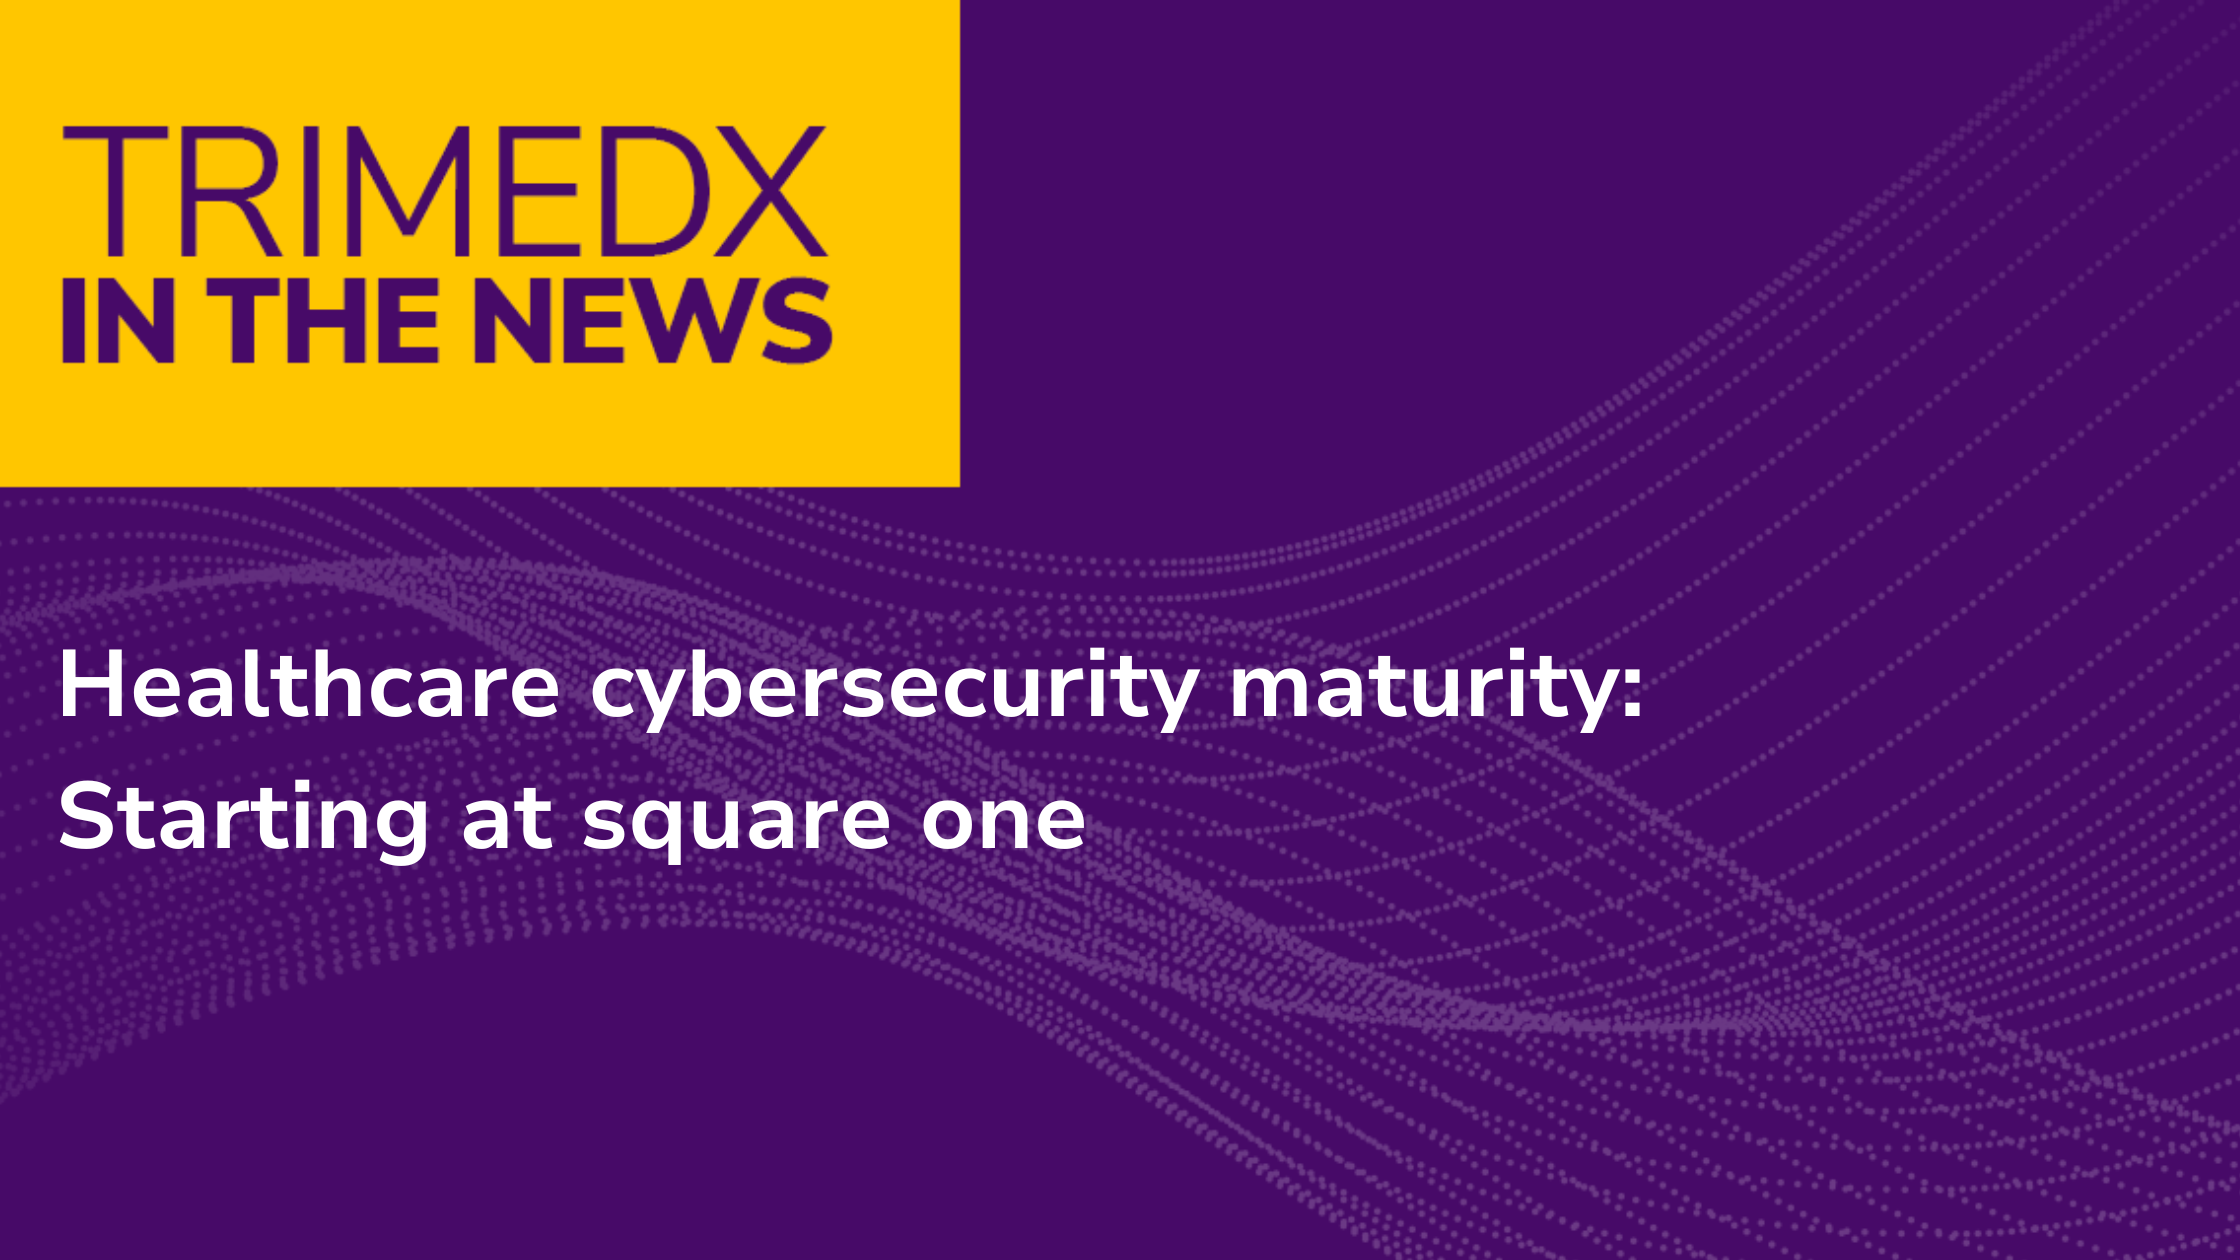 Healthcare cybersecurity maturity: Starting at square one, TRIMEDX in the news graphic